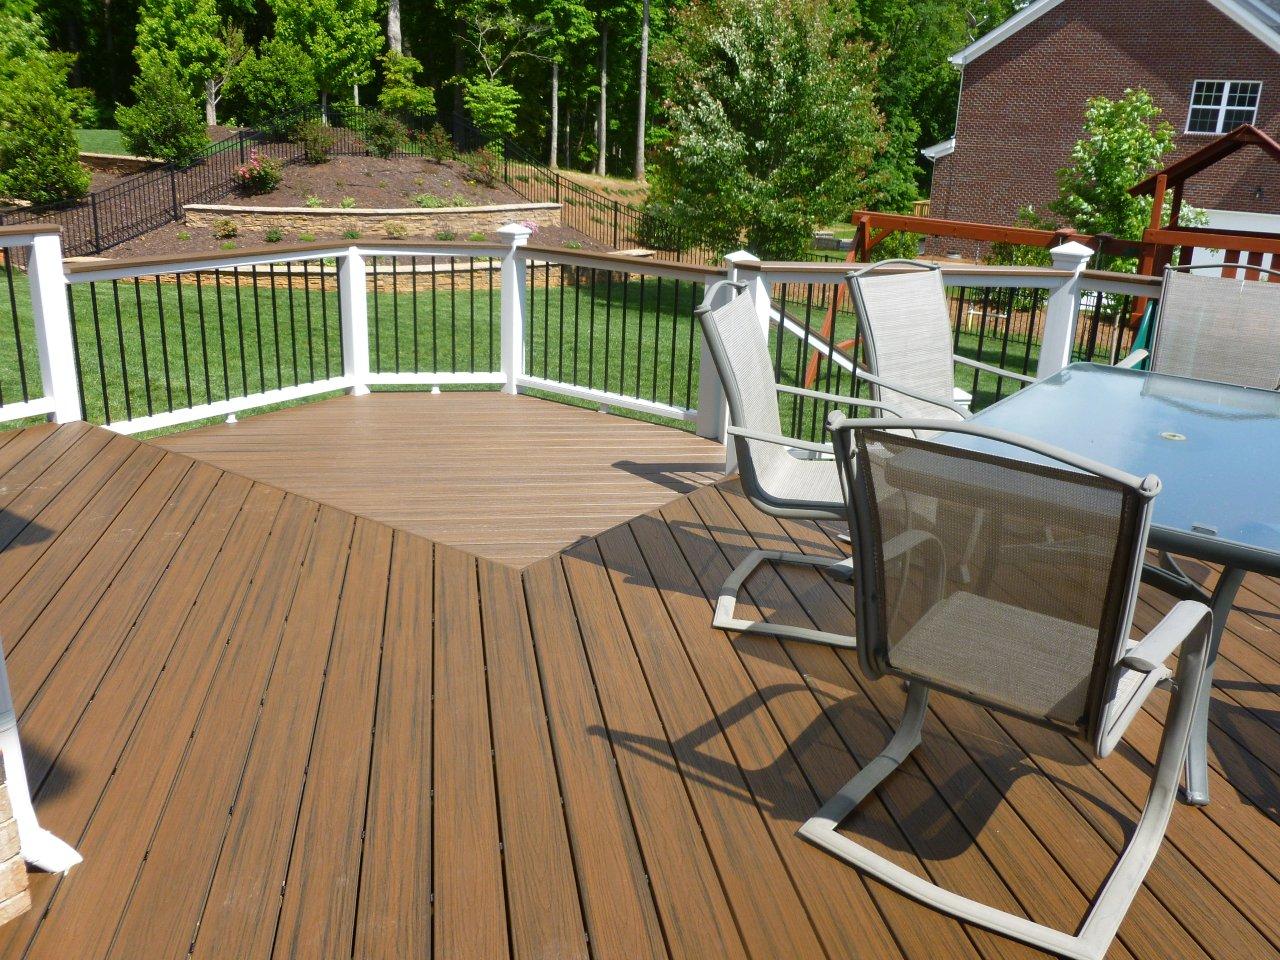 Consider-updating-your-deck-railing-and-balusters